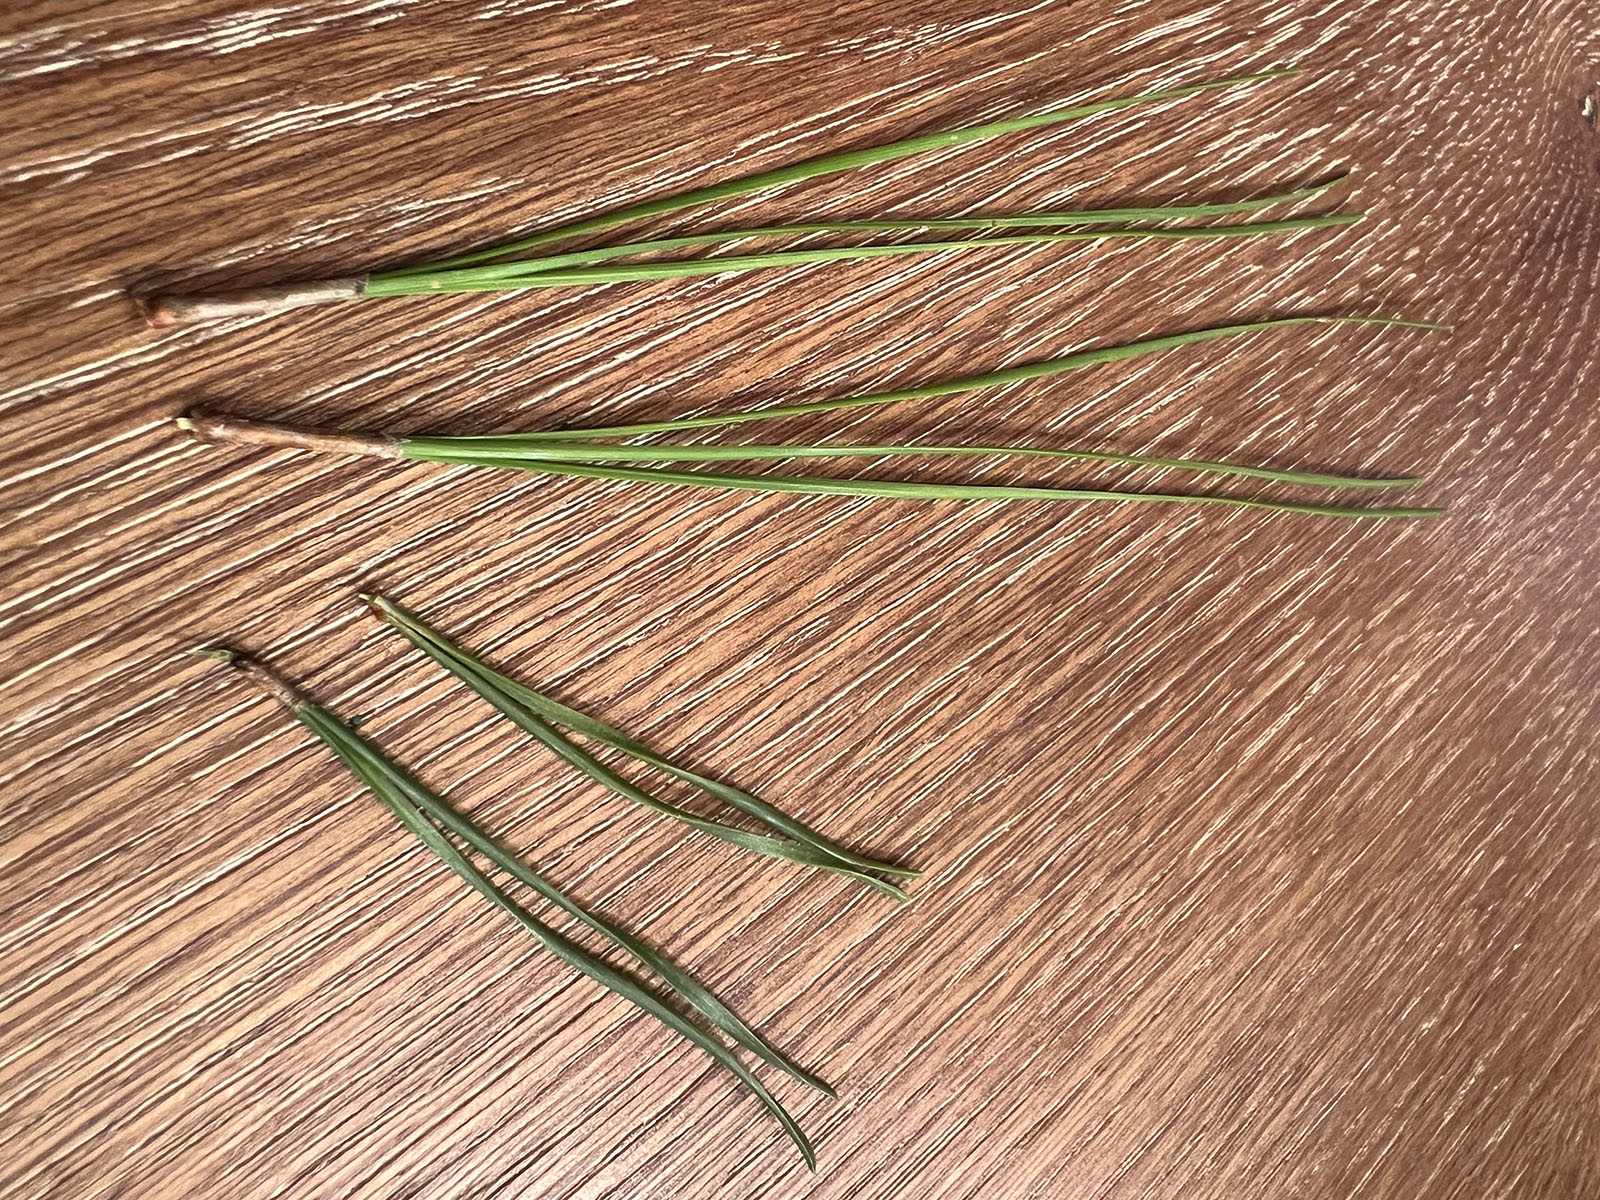 A photo of four bundles of pine tree needles, with two long, skinny, two-needle bunches on top and two short, twisted, three-needle bunches on bottom. 